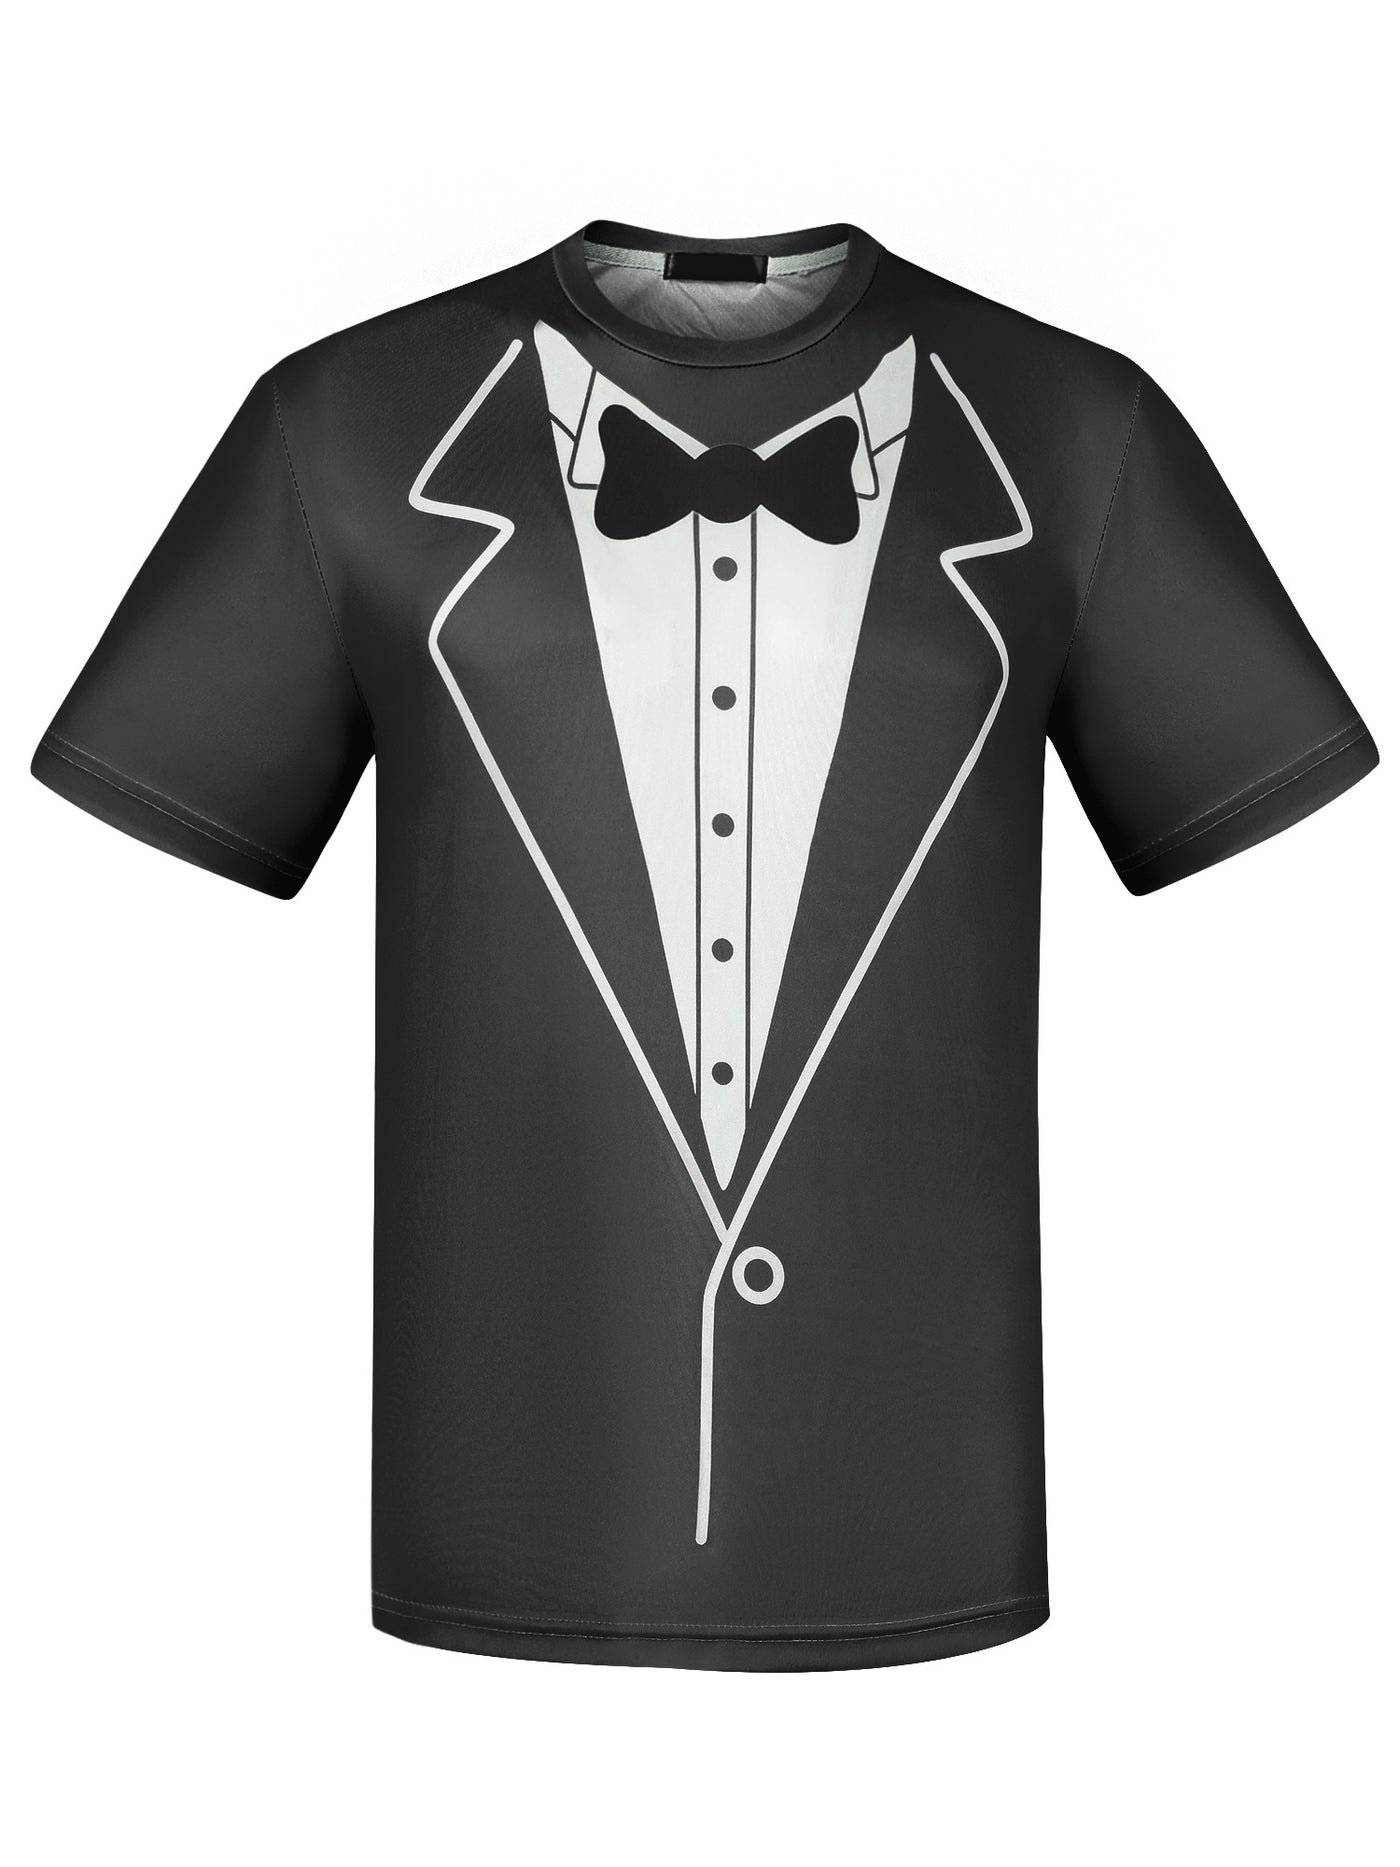 Bublédon Tuxedo Printed Costume Wedding Party Funny Graphic T-Shirt